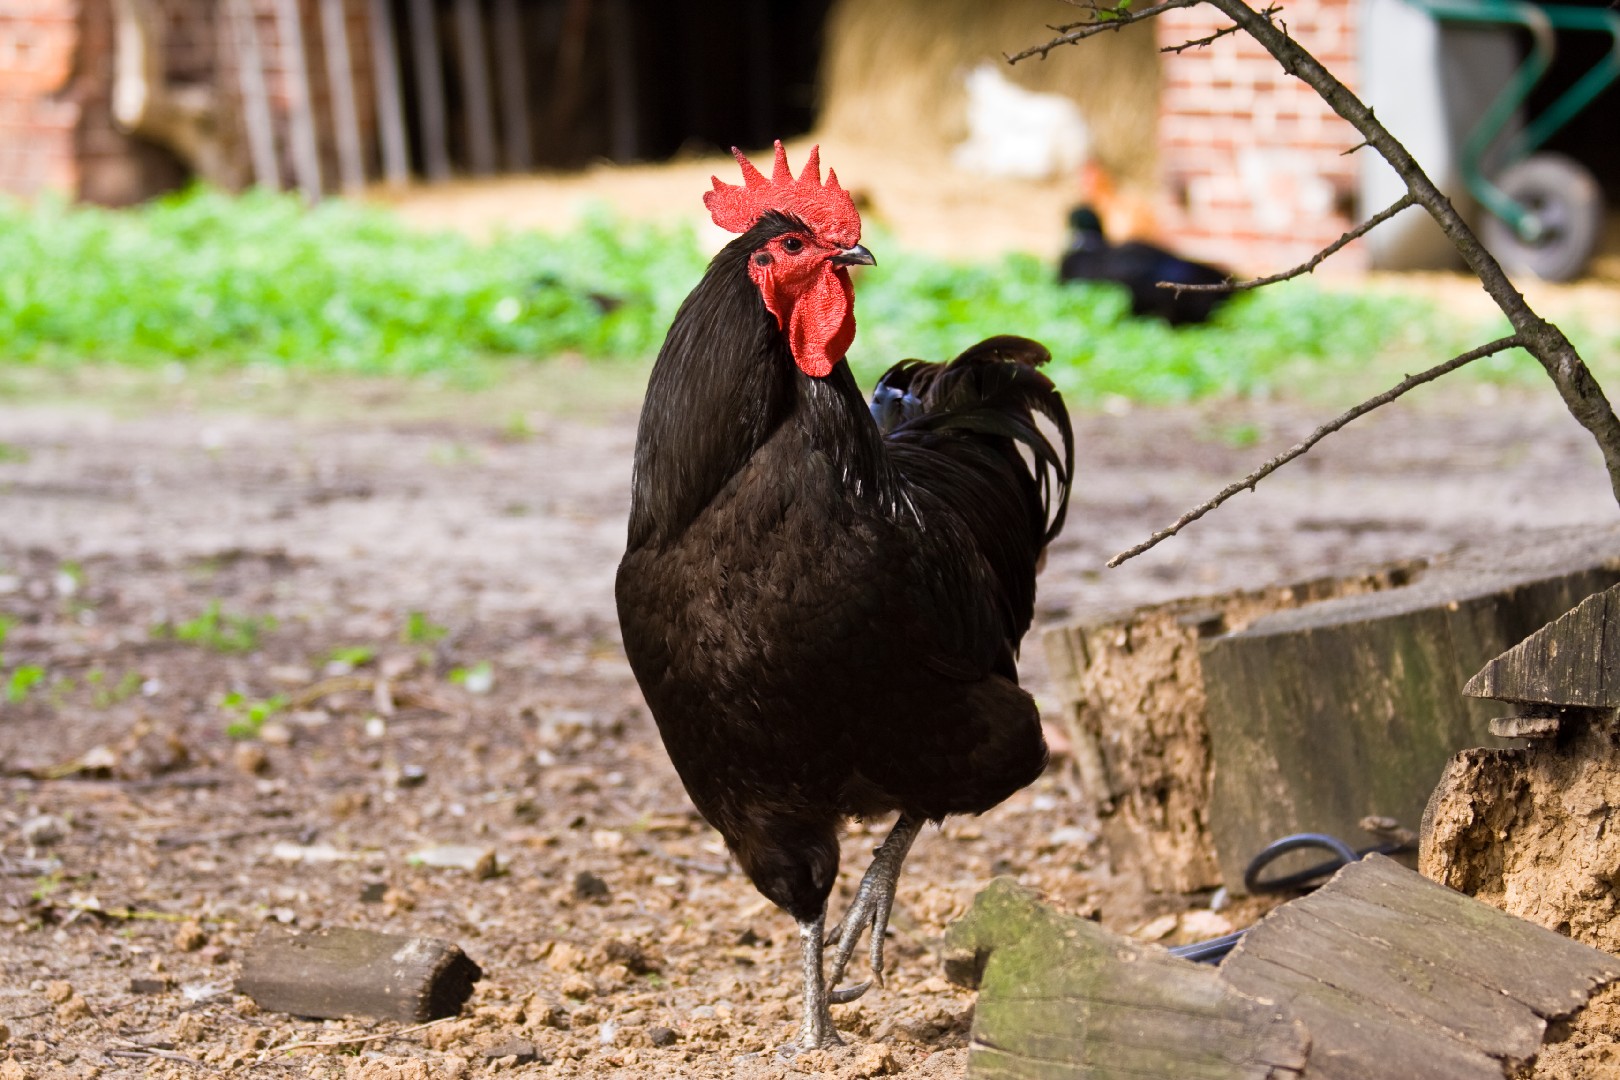 Jersey Giant Chicken (Gallus gallus domesticus 'Jersey Giant')